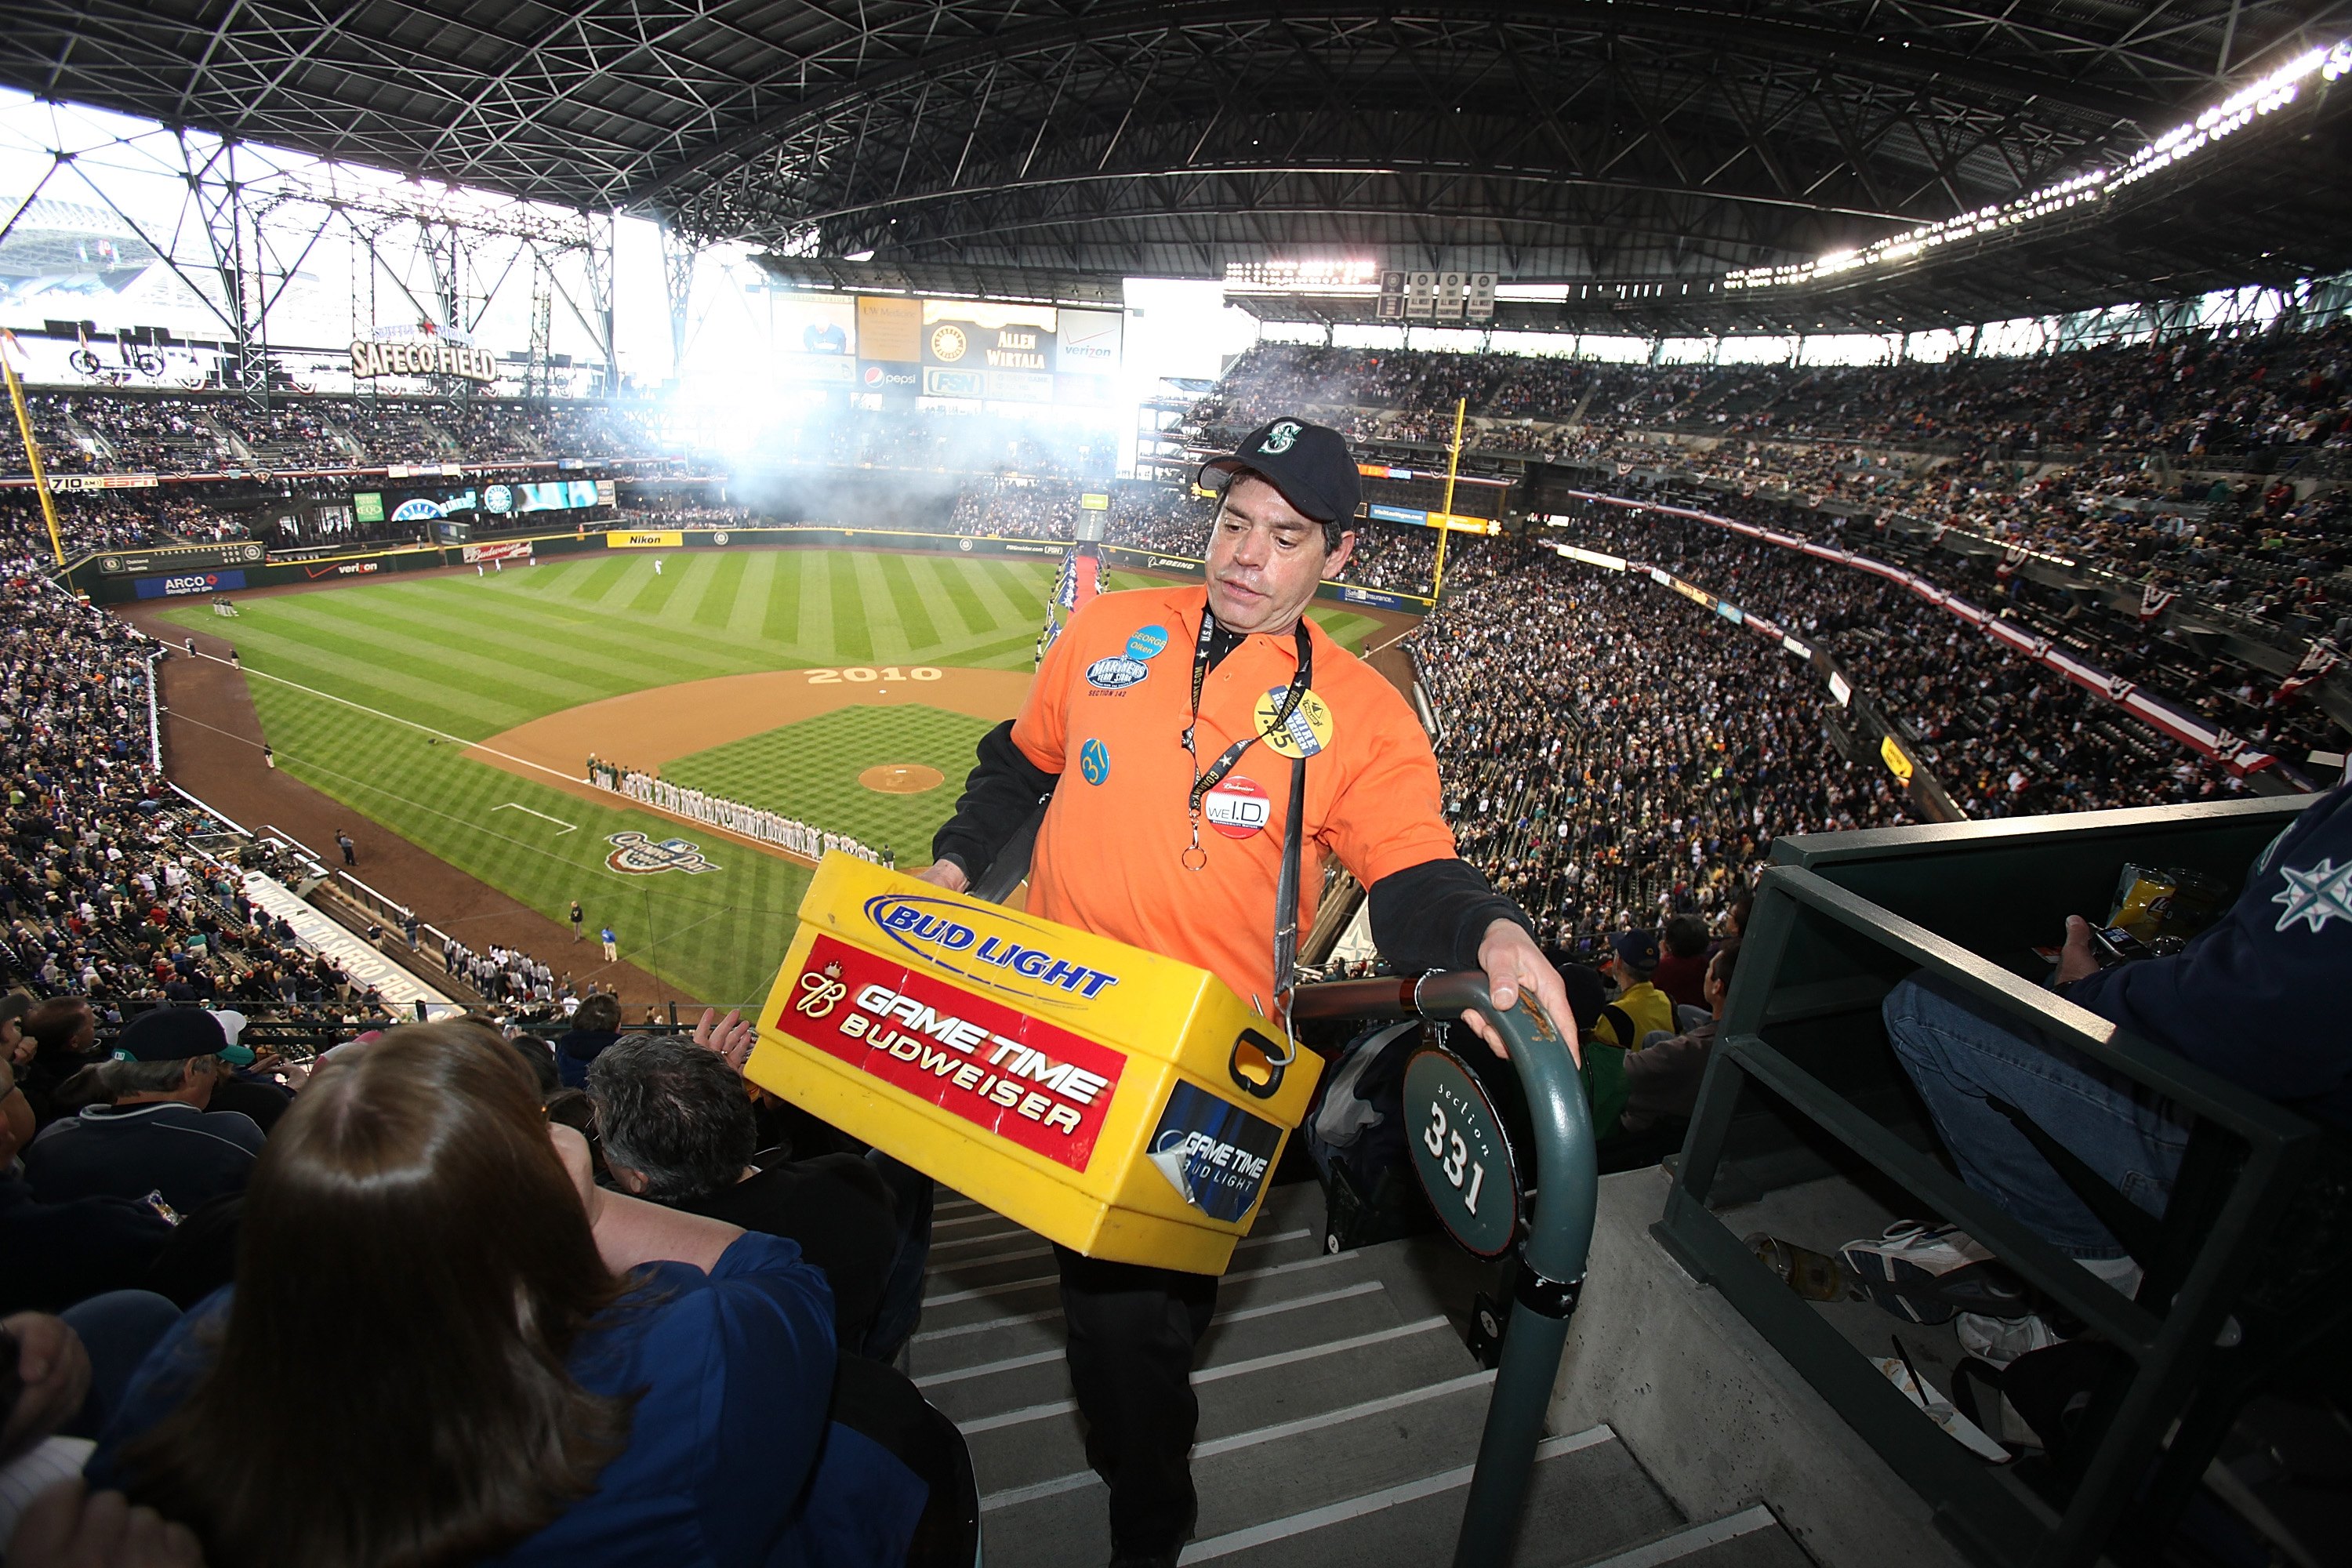 SEATTLE - APRIL 12:  A beer vendor works section 331 during the game between the Oakland Athletics and the Seattle Mariners during the Mariners' home opener at Safeco Field on April 12, 2010 in Seattle, Washington. (Photo by Otto Greule Jr/Getty Images)